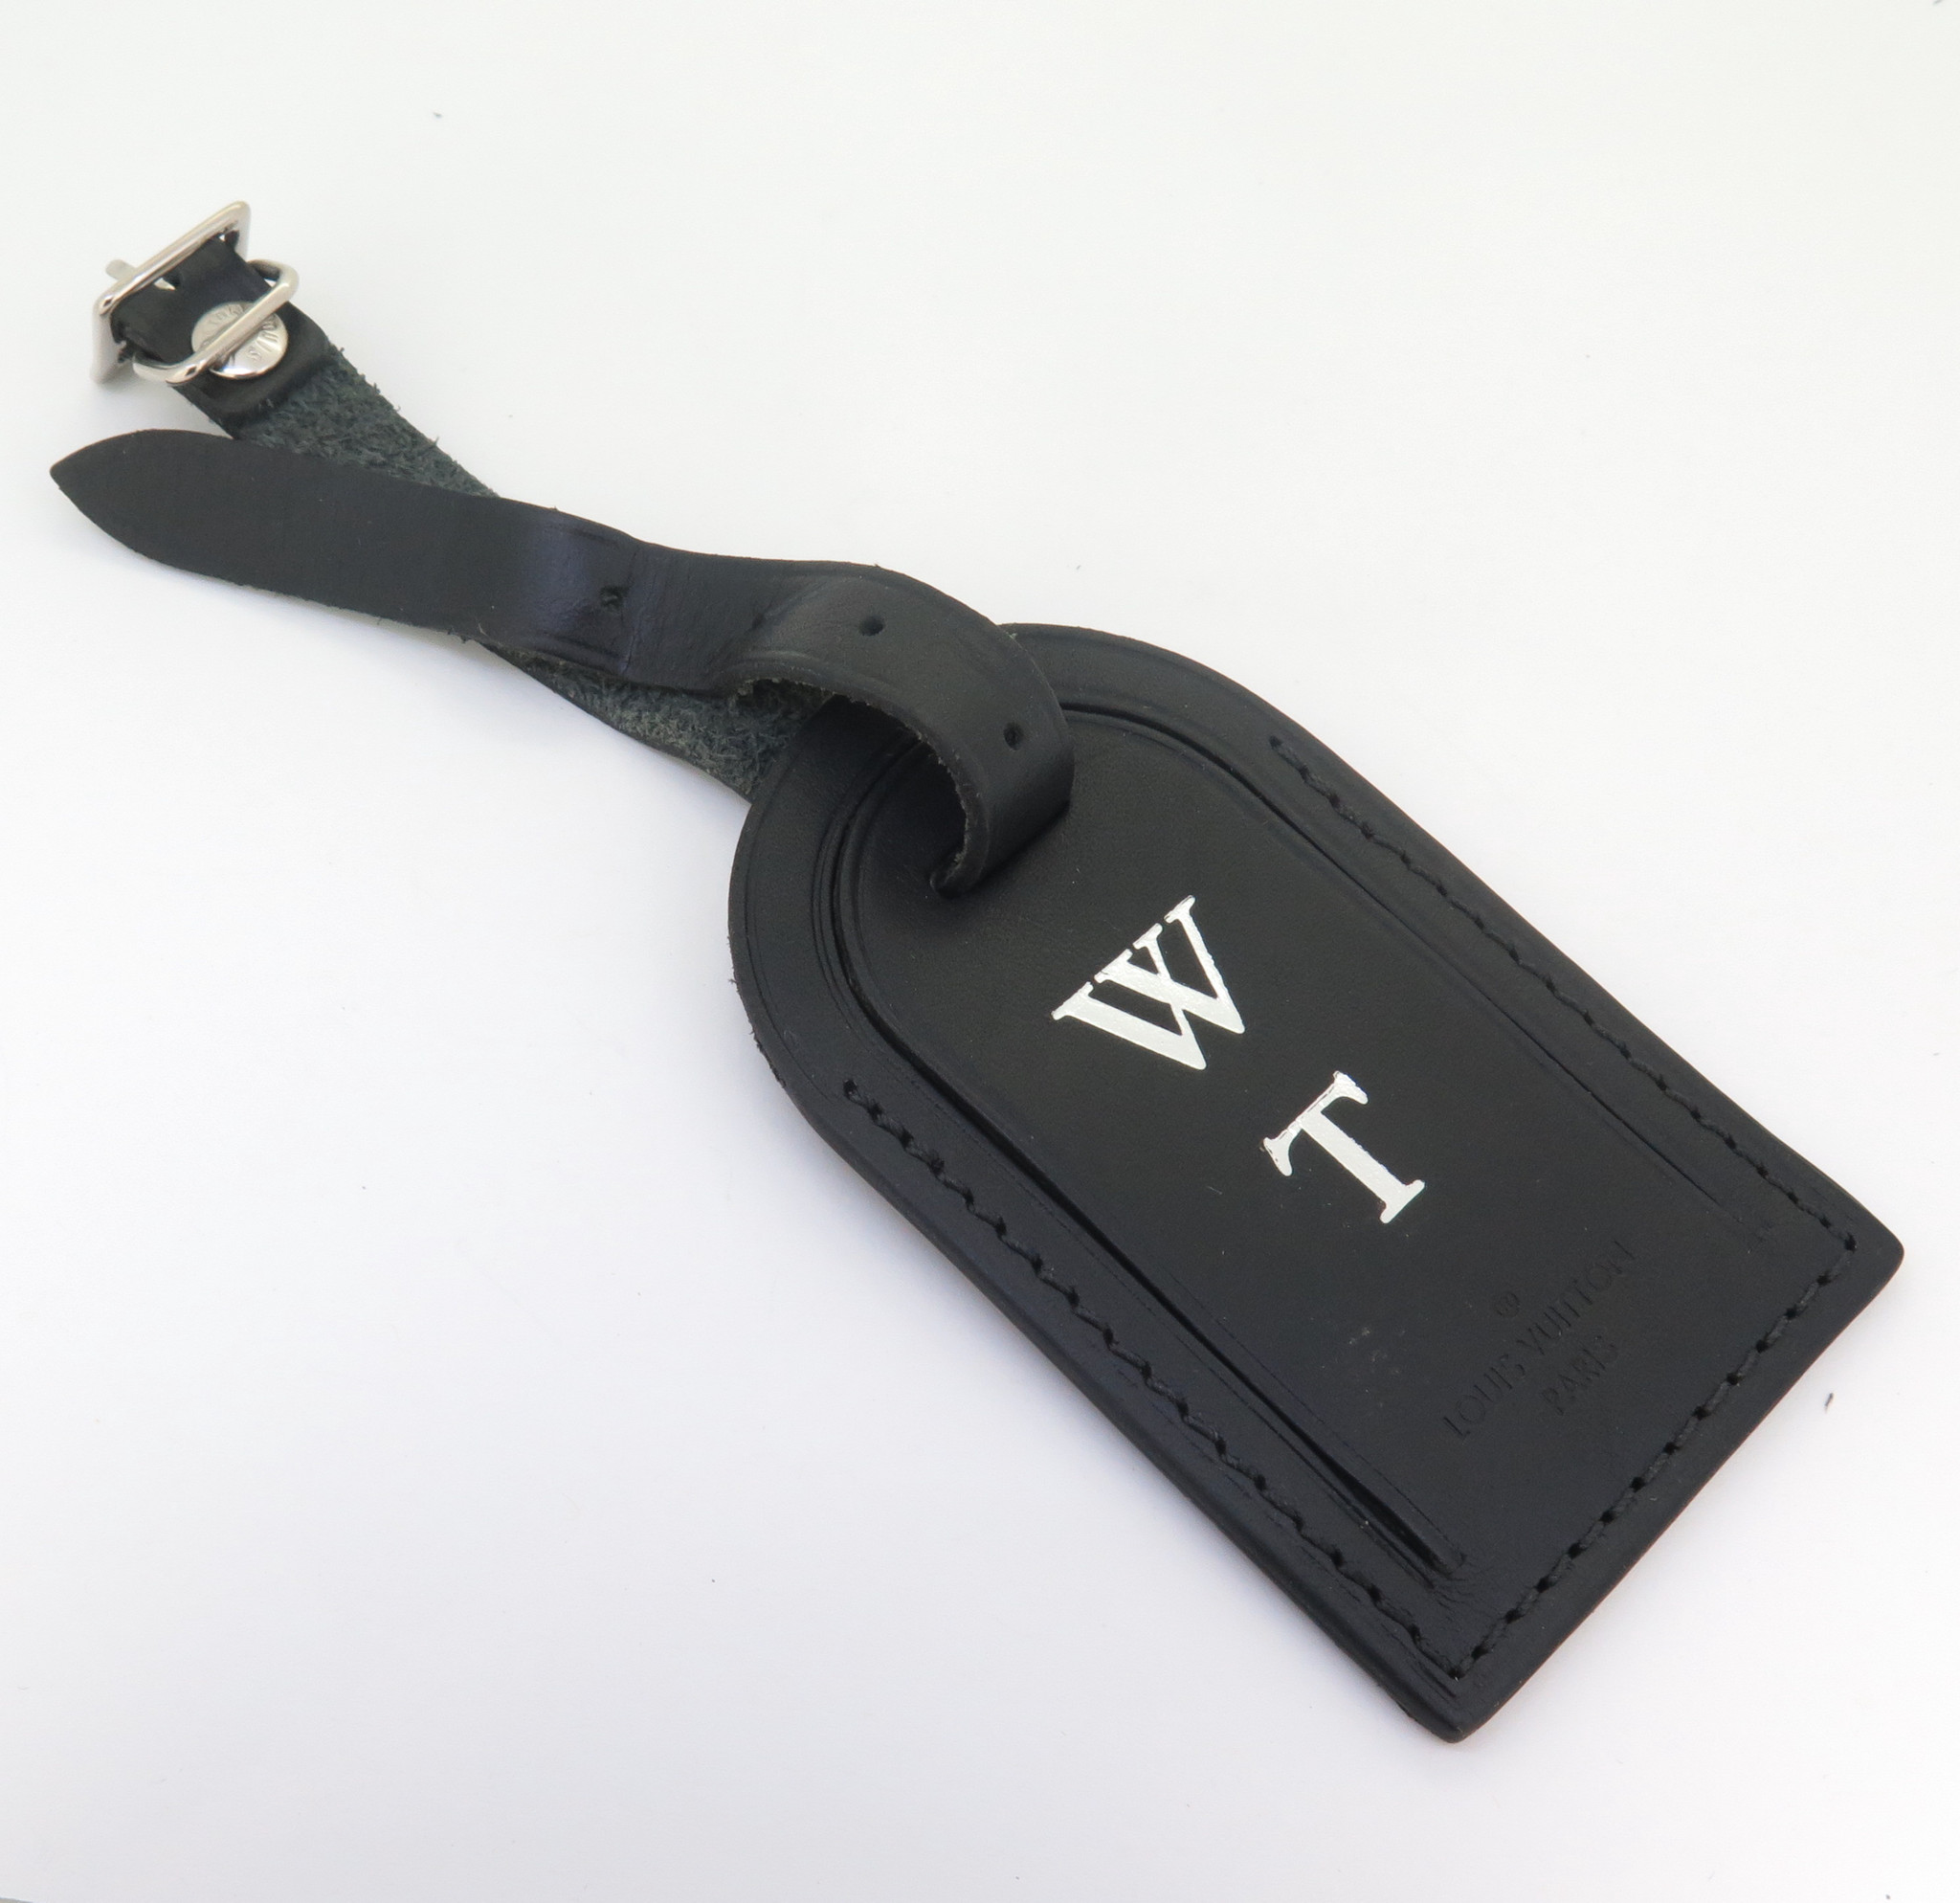 Louis Vuitton Monogrammed Luggage Bag Identification Tag - WT